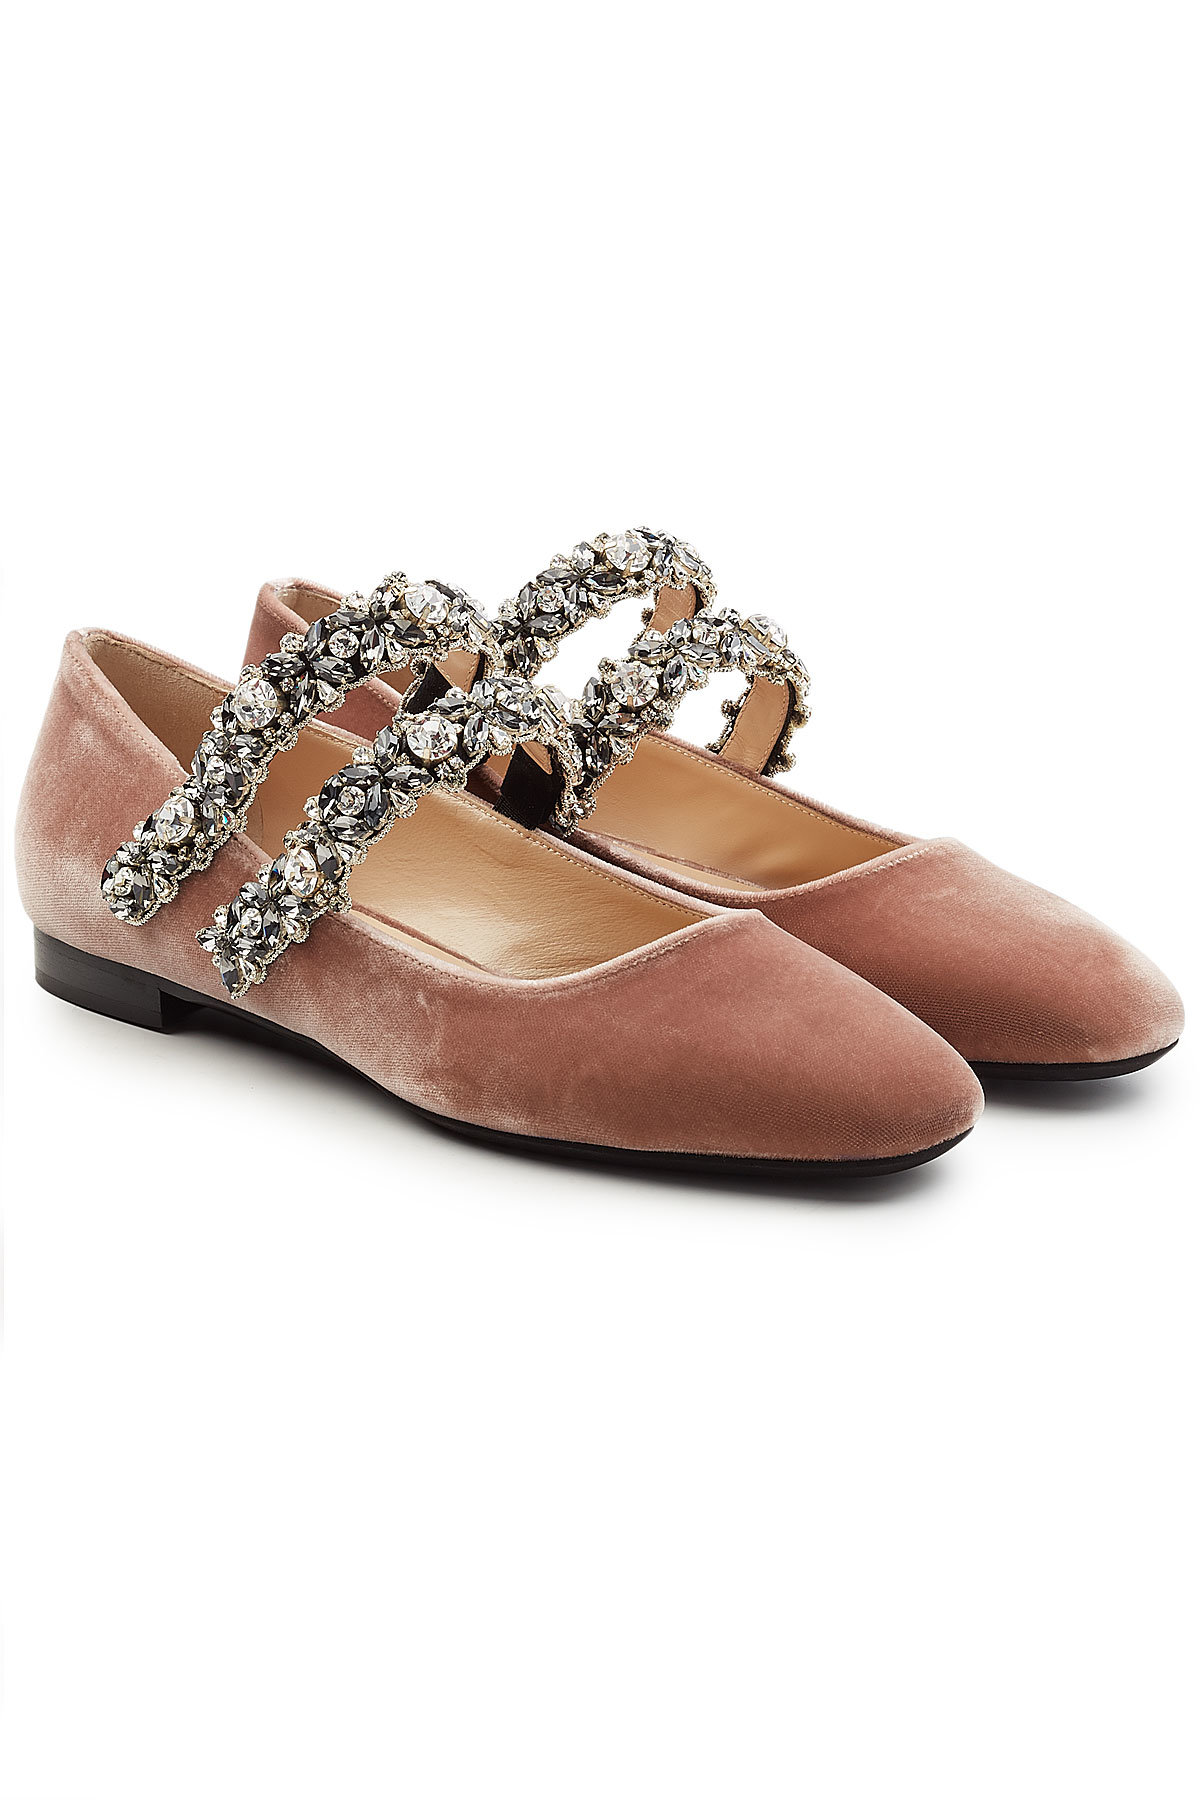 Velvet Shoes with Embellished Straps by N°21